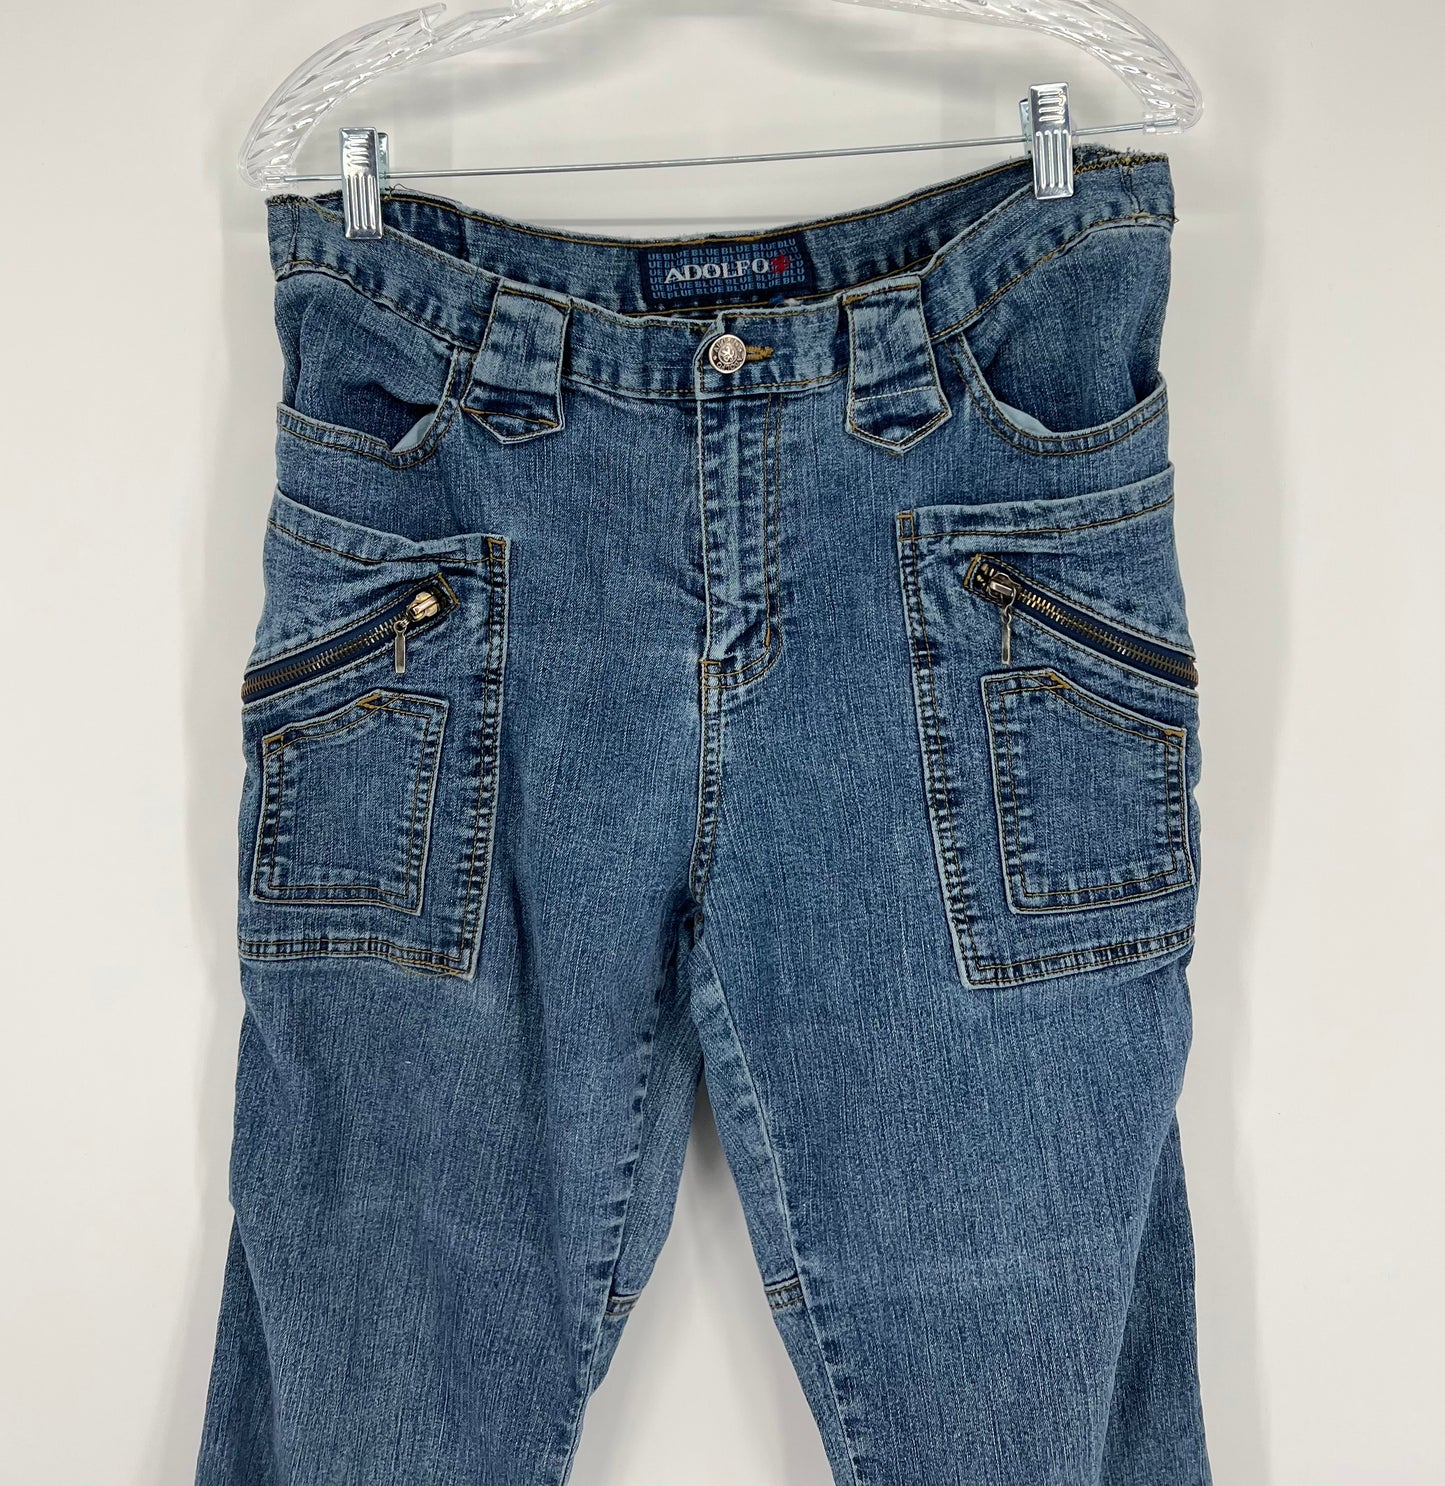 Vintage 90s / Y2K Adolfo Mid-Rise Jeans with Zippered Cargo Pockets | Sz: 14